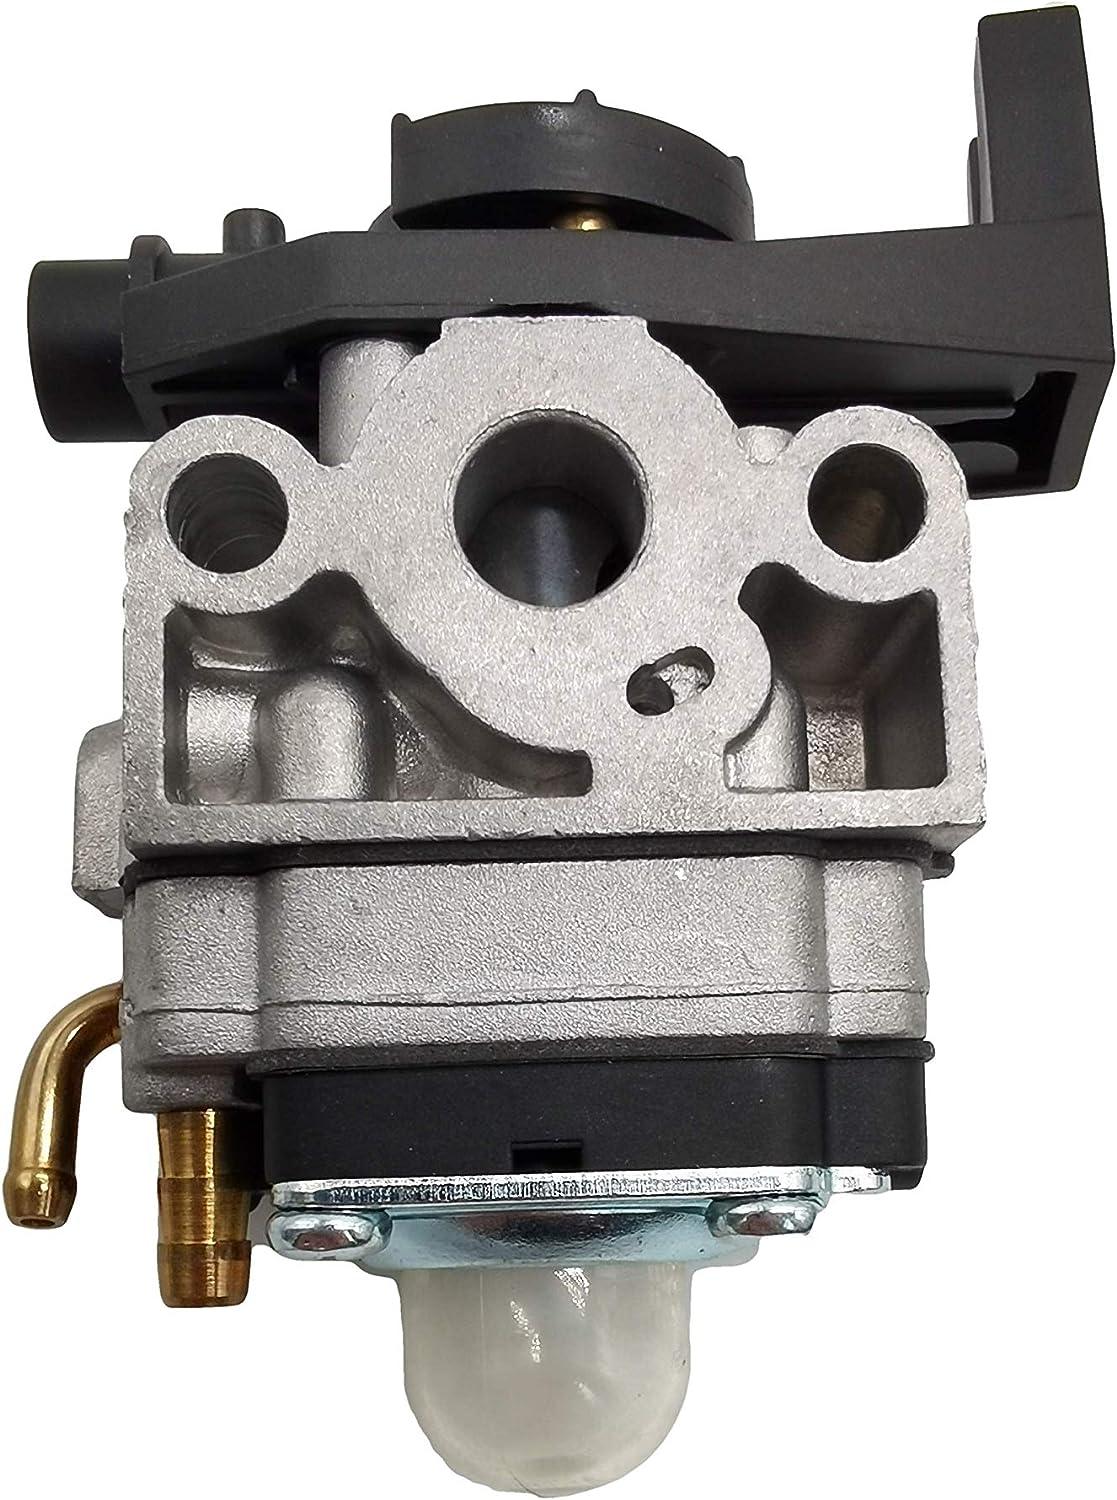 Hipa GA324H Carburetor Compatible with Honda GX35 GX35NT Engines HHT35S String Trimmers Brush Cutters Similar to 16100-Z0Z-815 - hipaparts